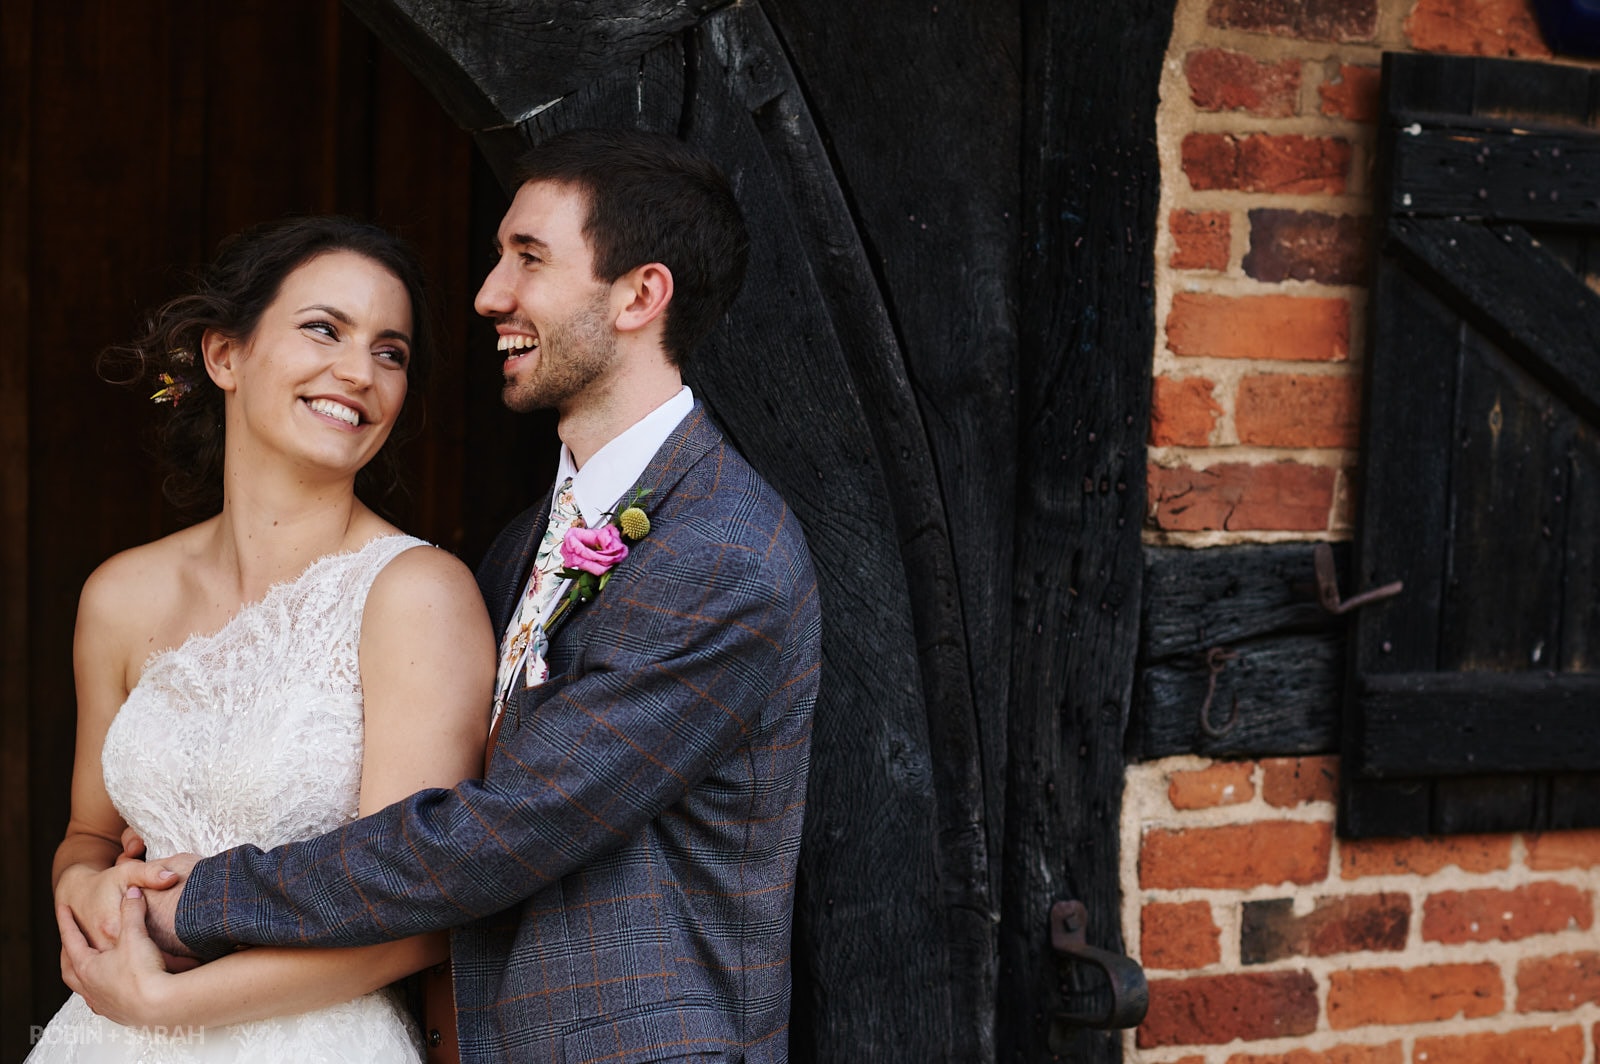 Bride and groom relax together in archway of old building